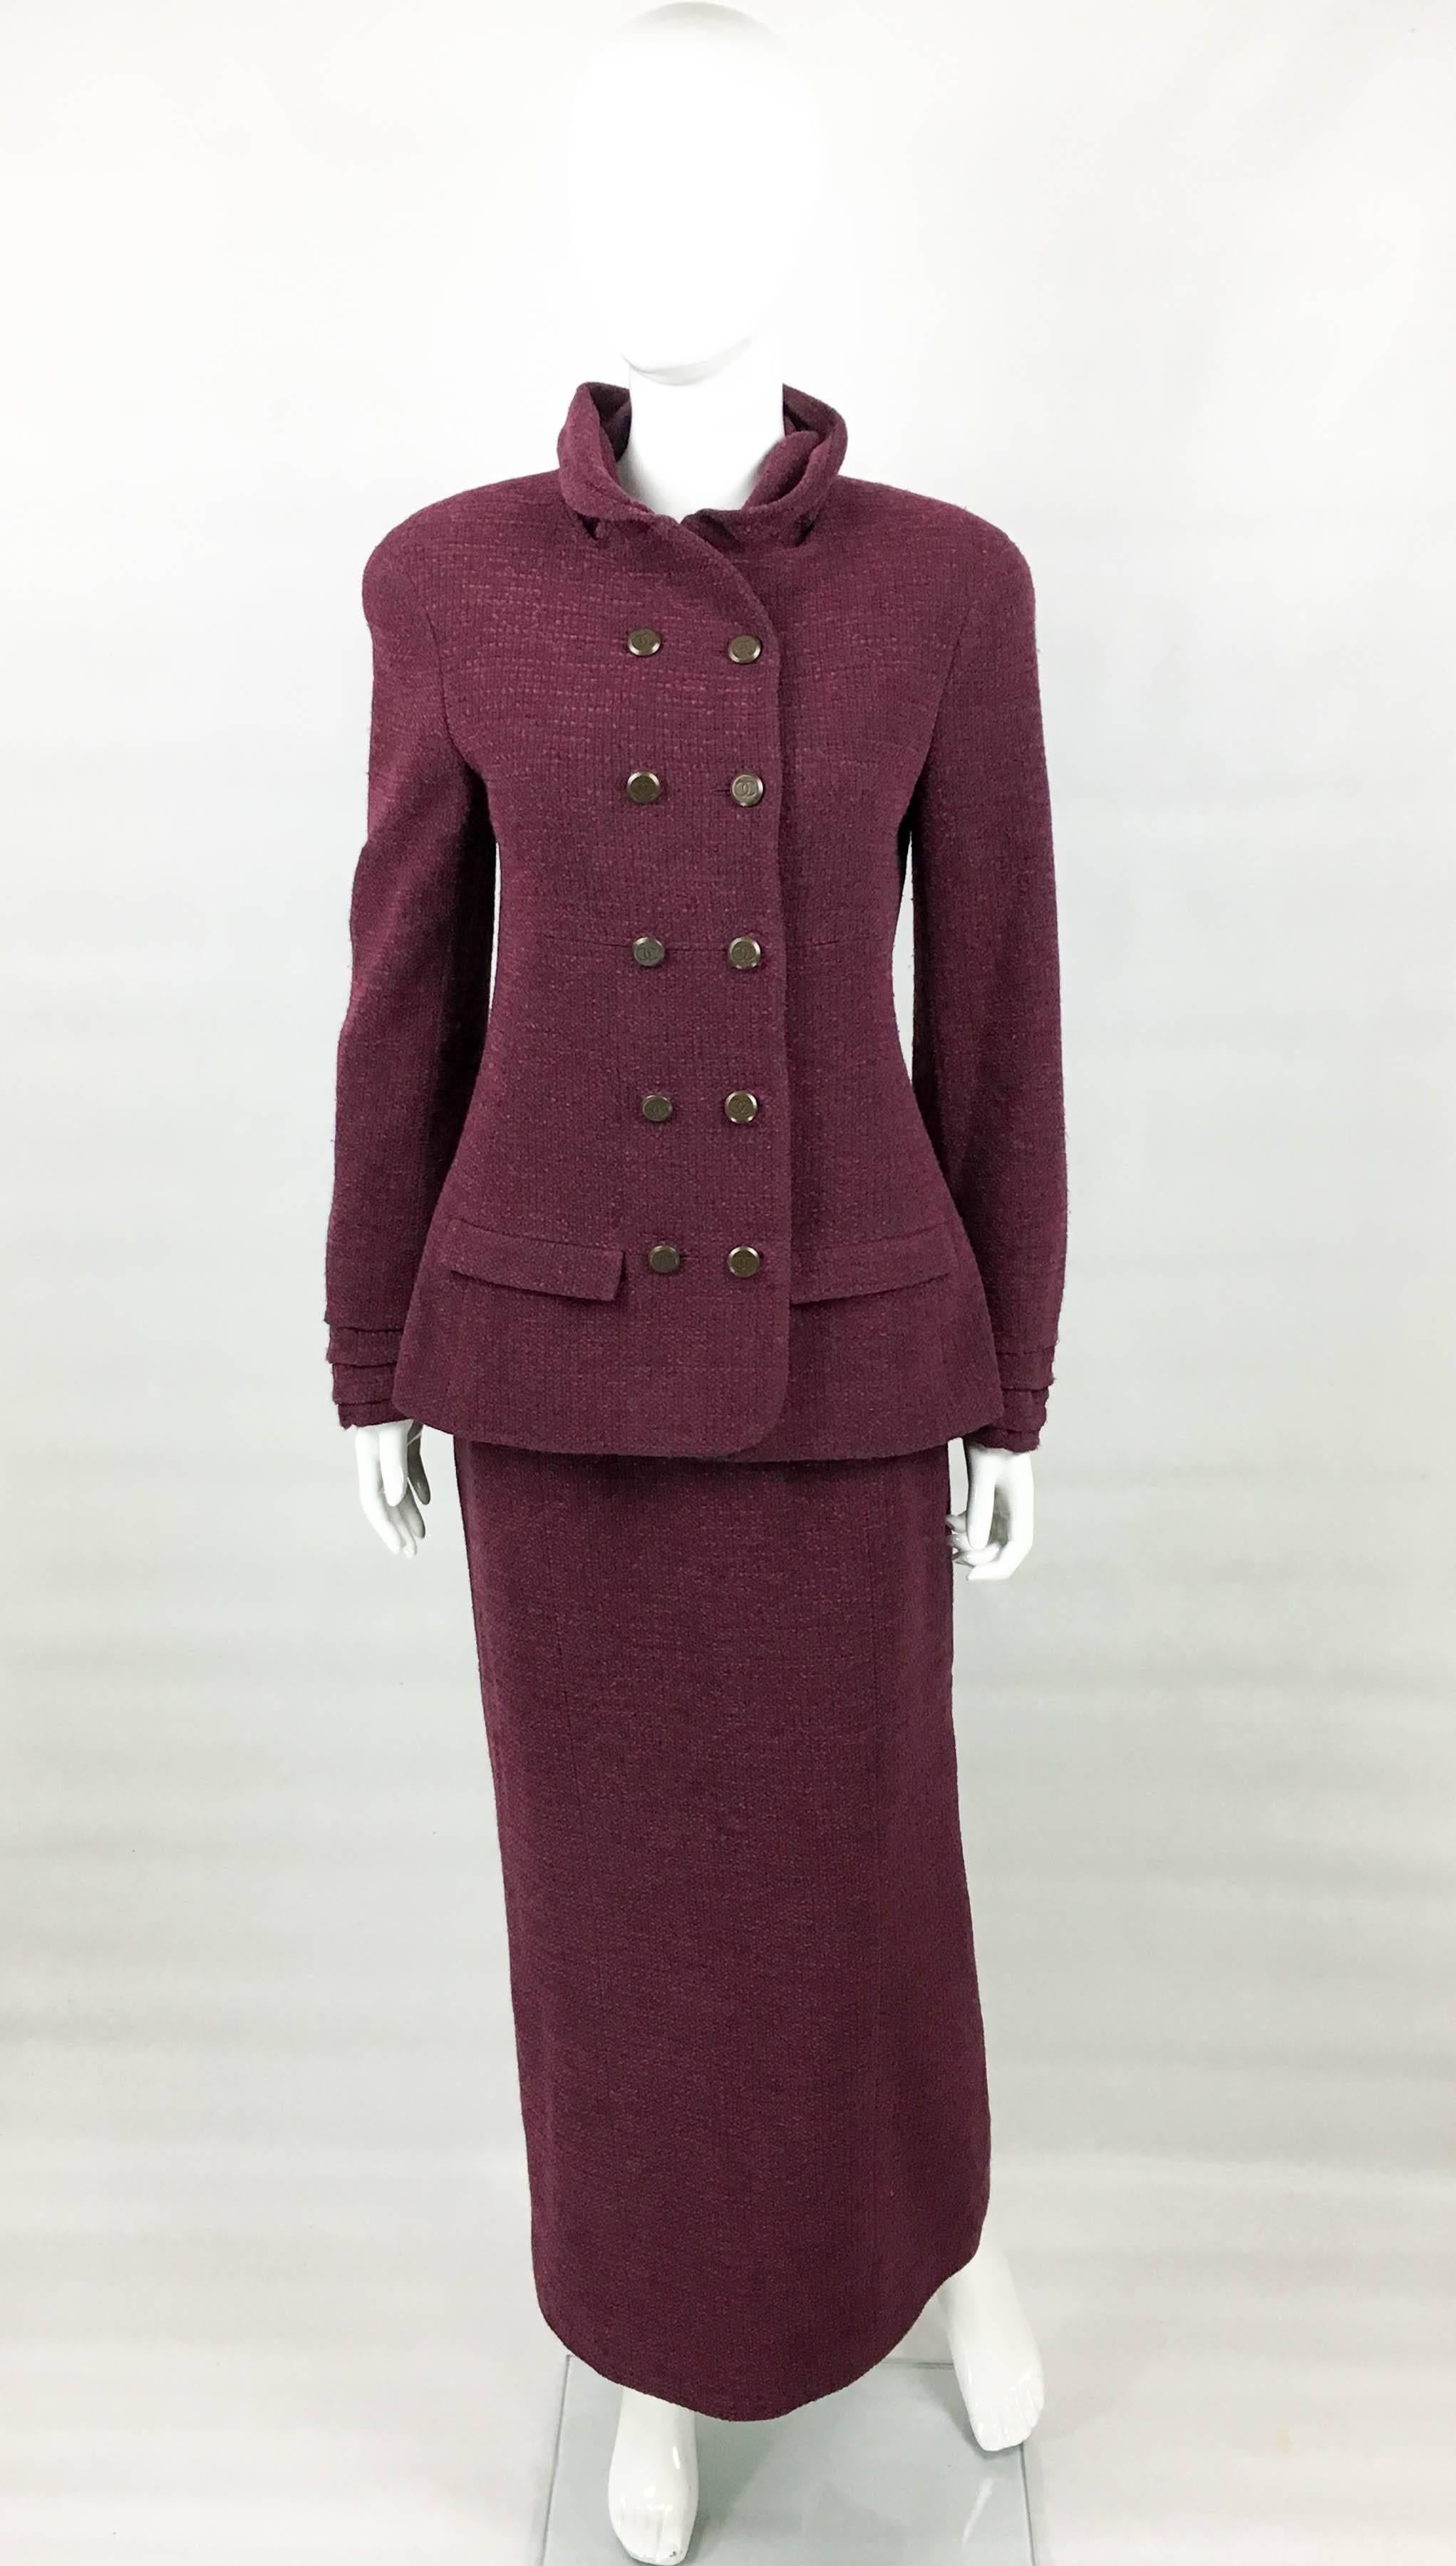 Vintage Chanel Burgundy Long Skirt Suit. This very elegant suit by Chanel is from the 1998 Autumn / Winter Collection. Made in burgundy wool bouclé, it consists of a jacket and a long skirt. The double-breasted jacket has a cowl neck and pleating